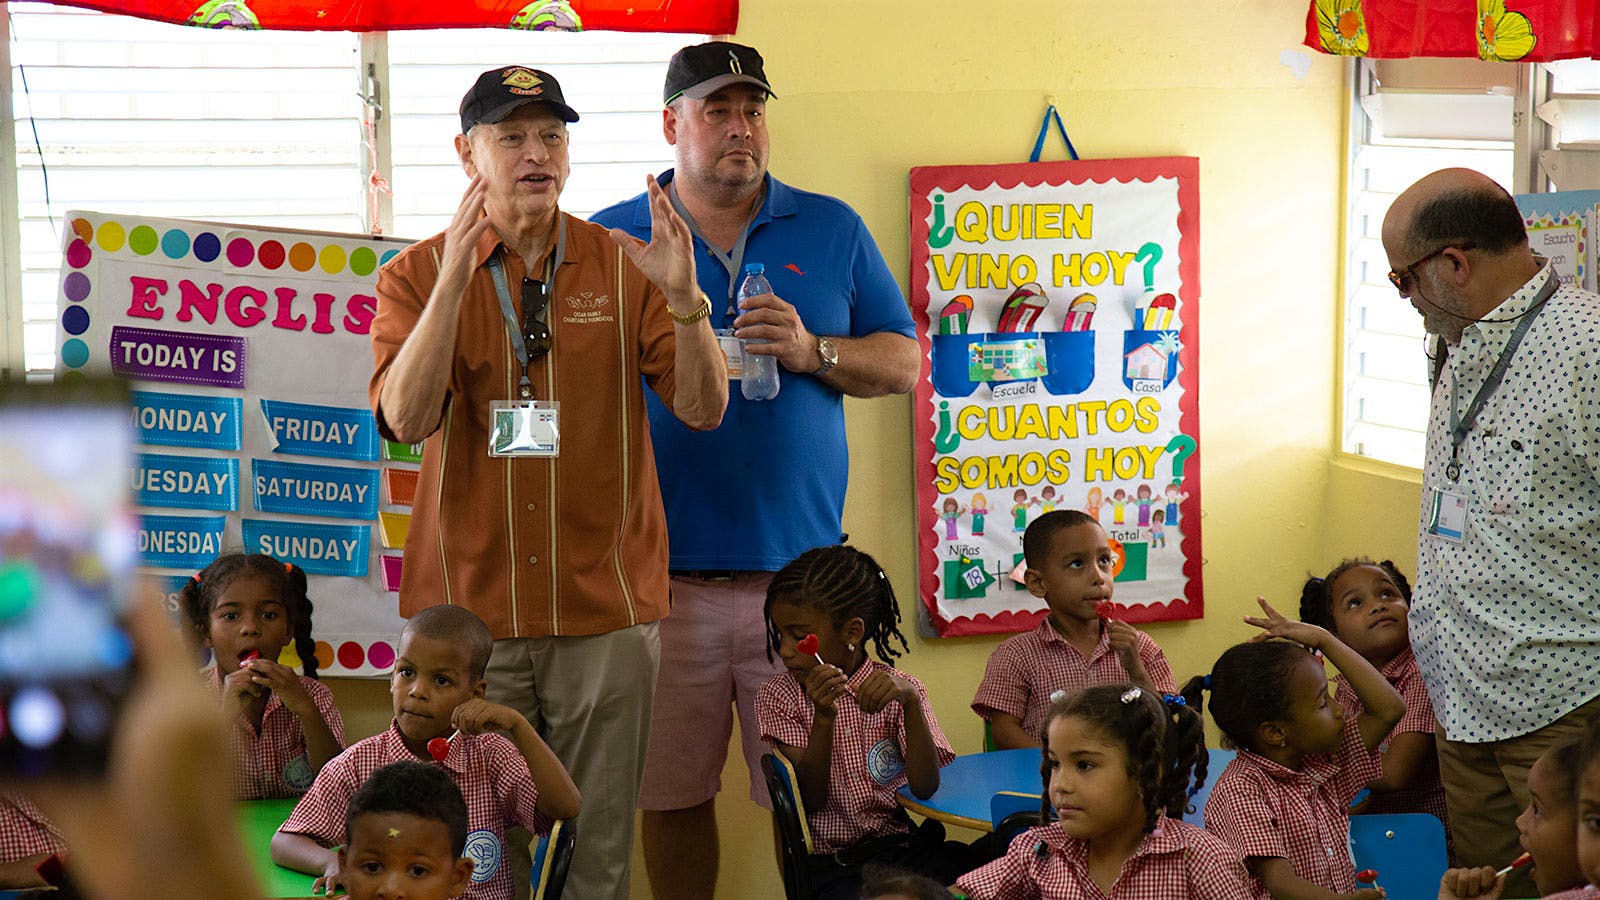 Eric Newman of J.C. Newman Cigars leading a tour of the Cigar Family School. Started in 2001, the Cigar Family Charitable Foundation has raised millions of dollars for the impoverished children of the Dominican Republic, including building a school. “The only way to break the cycle of poverty is through education,” says Newman.